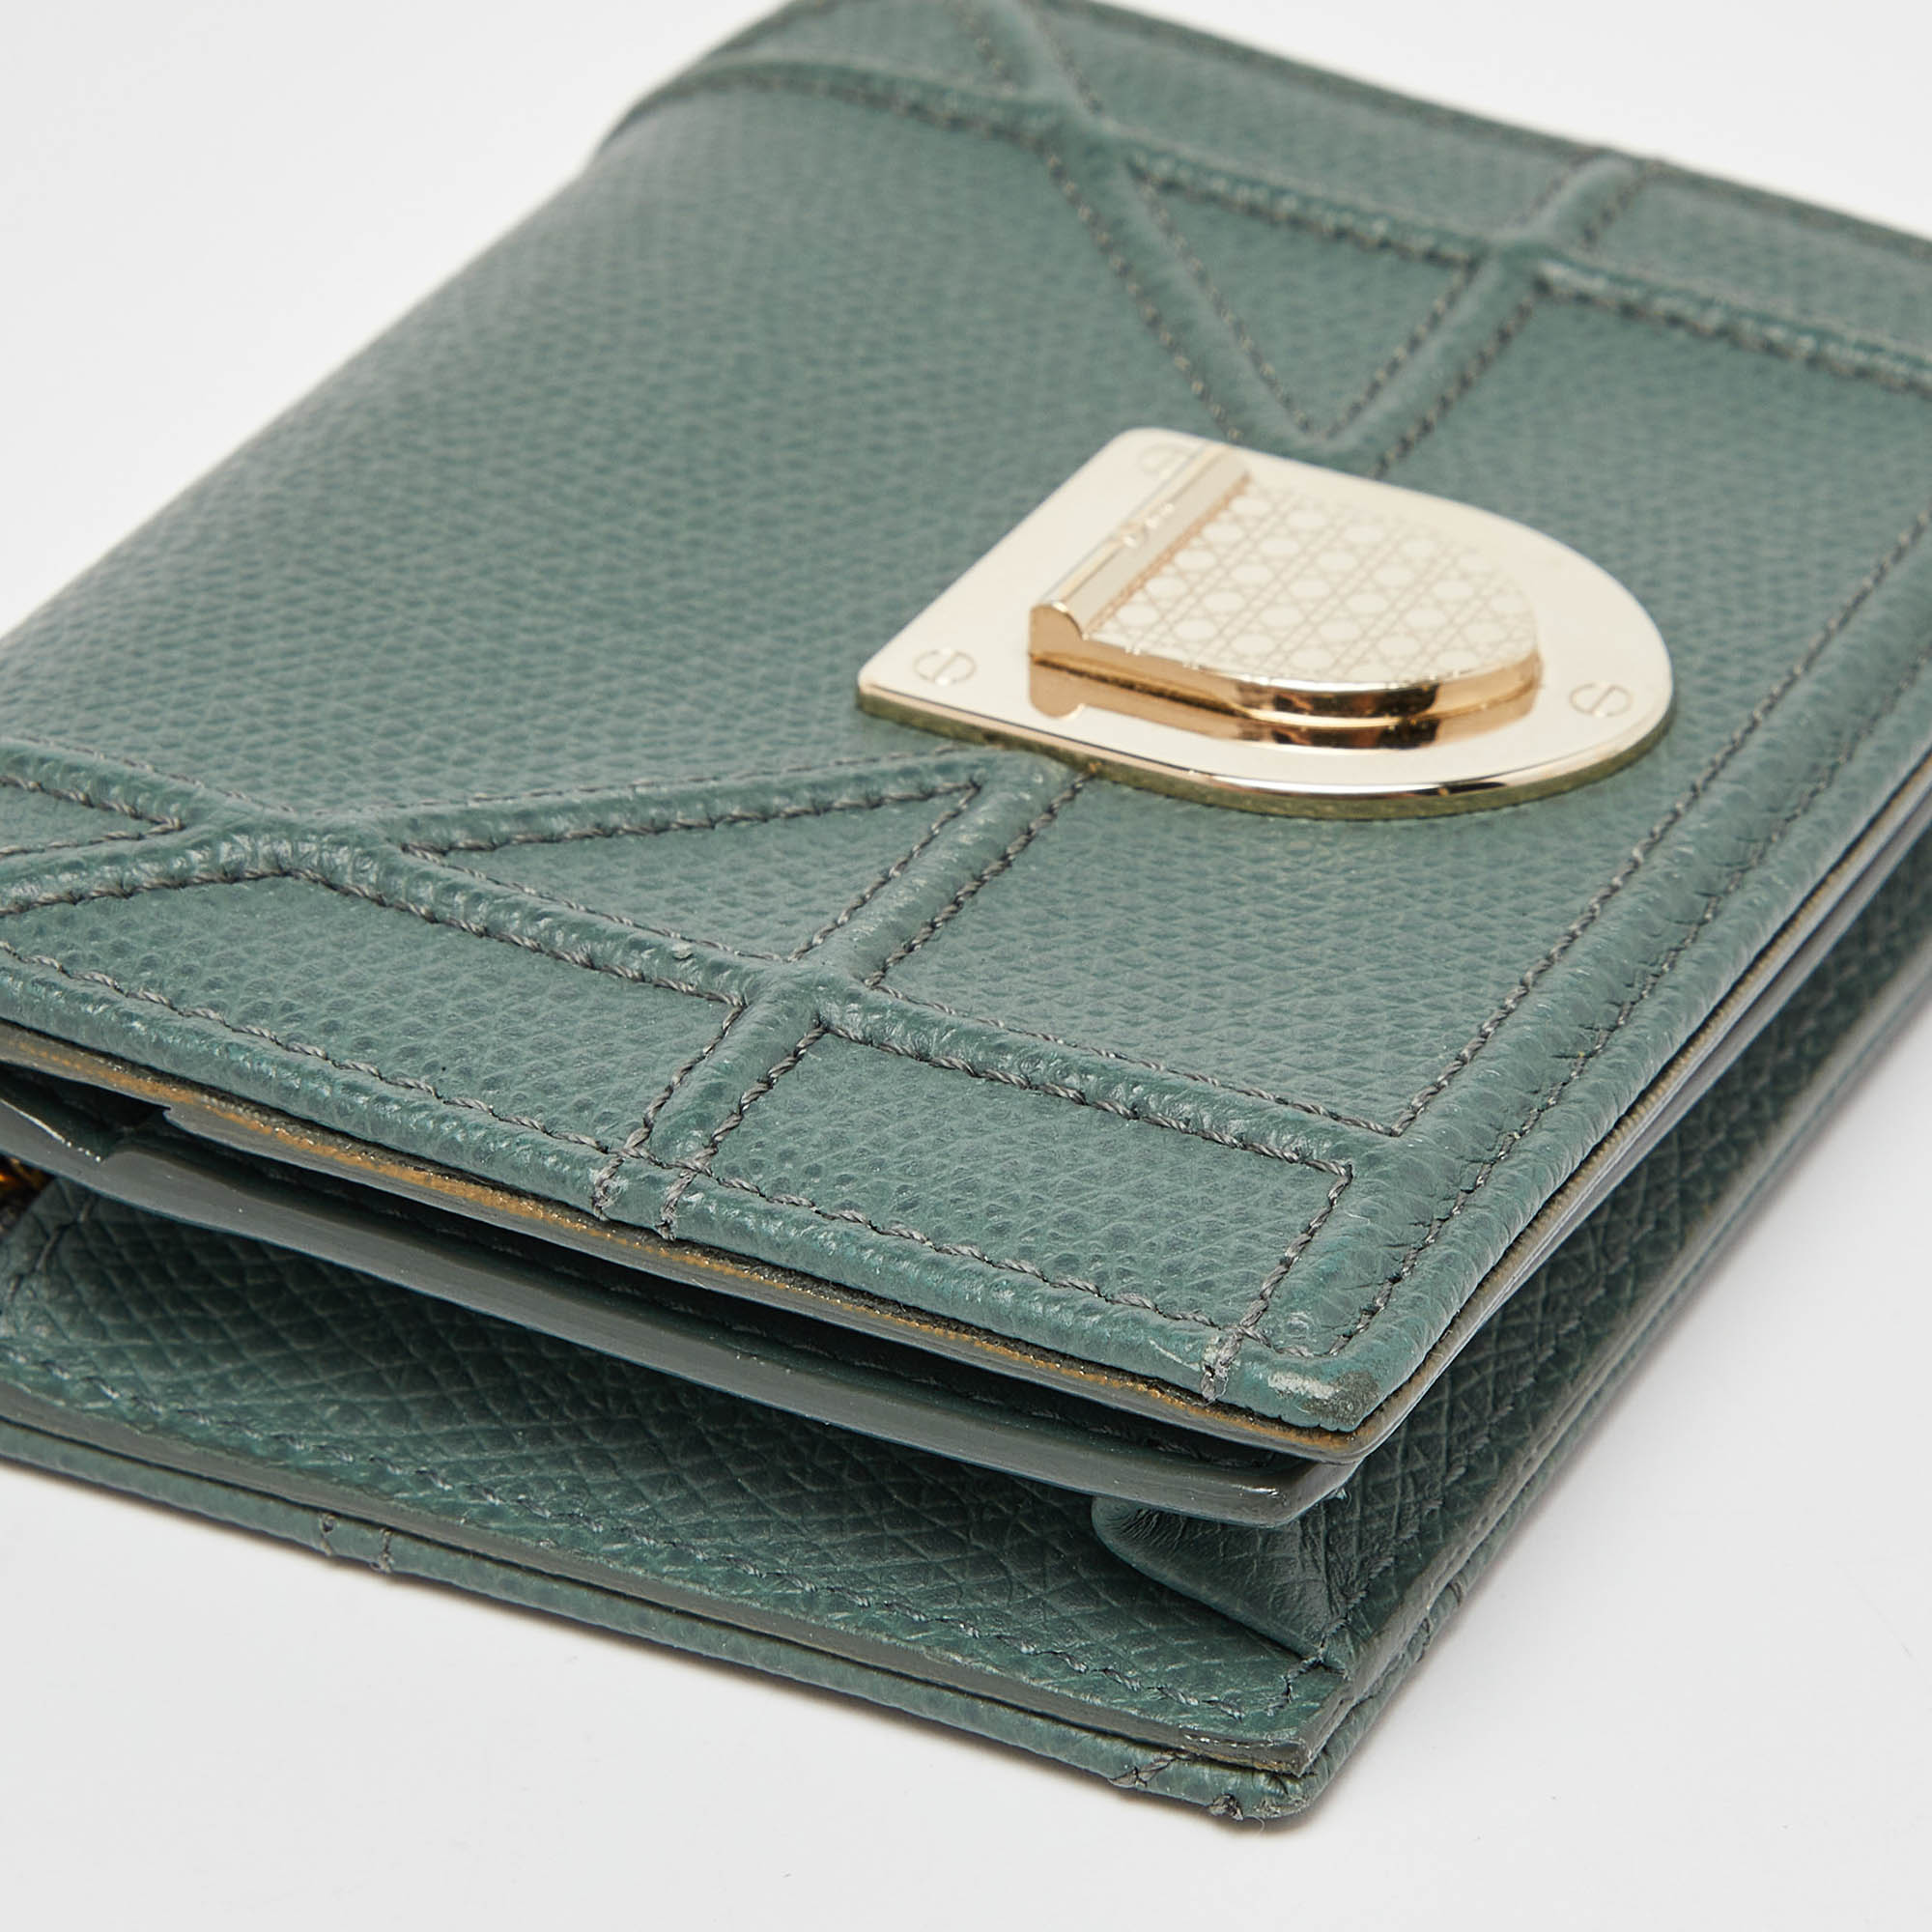 Dior Green Leather Diorama Trifold Wallet